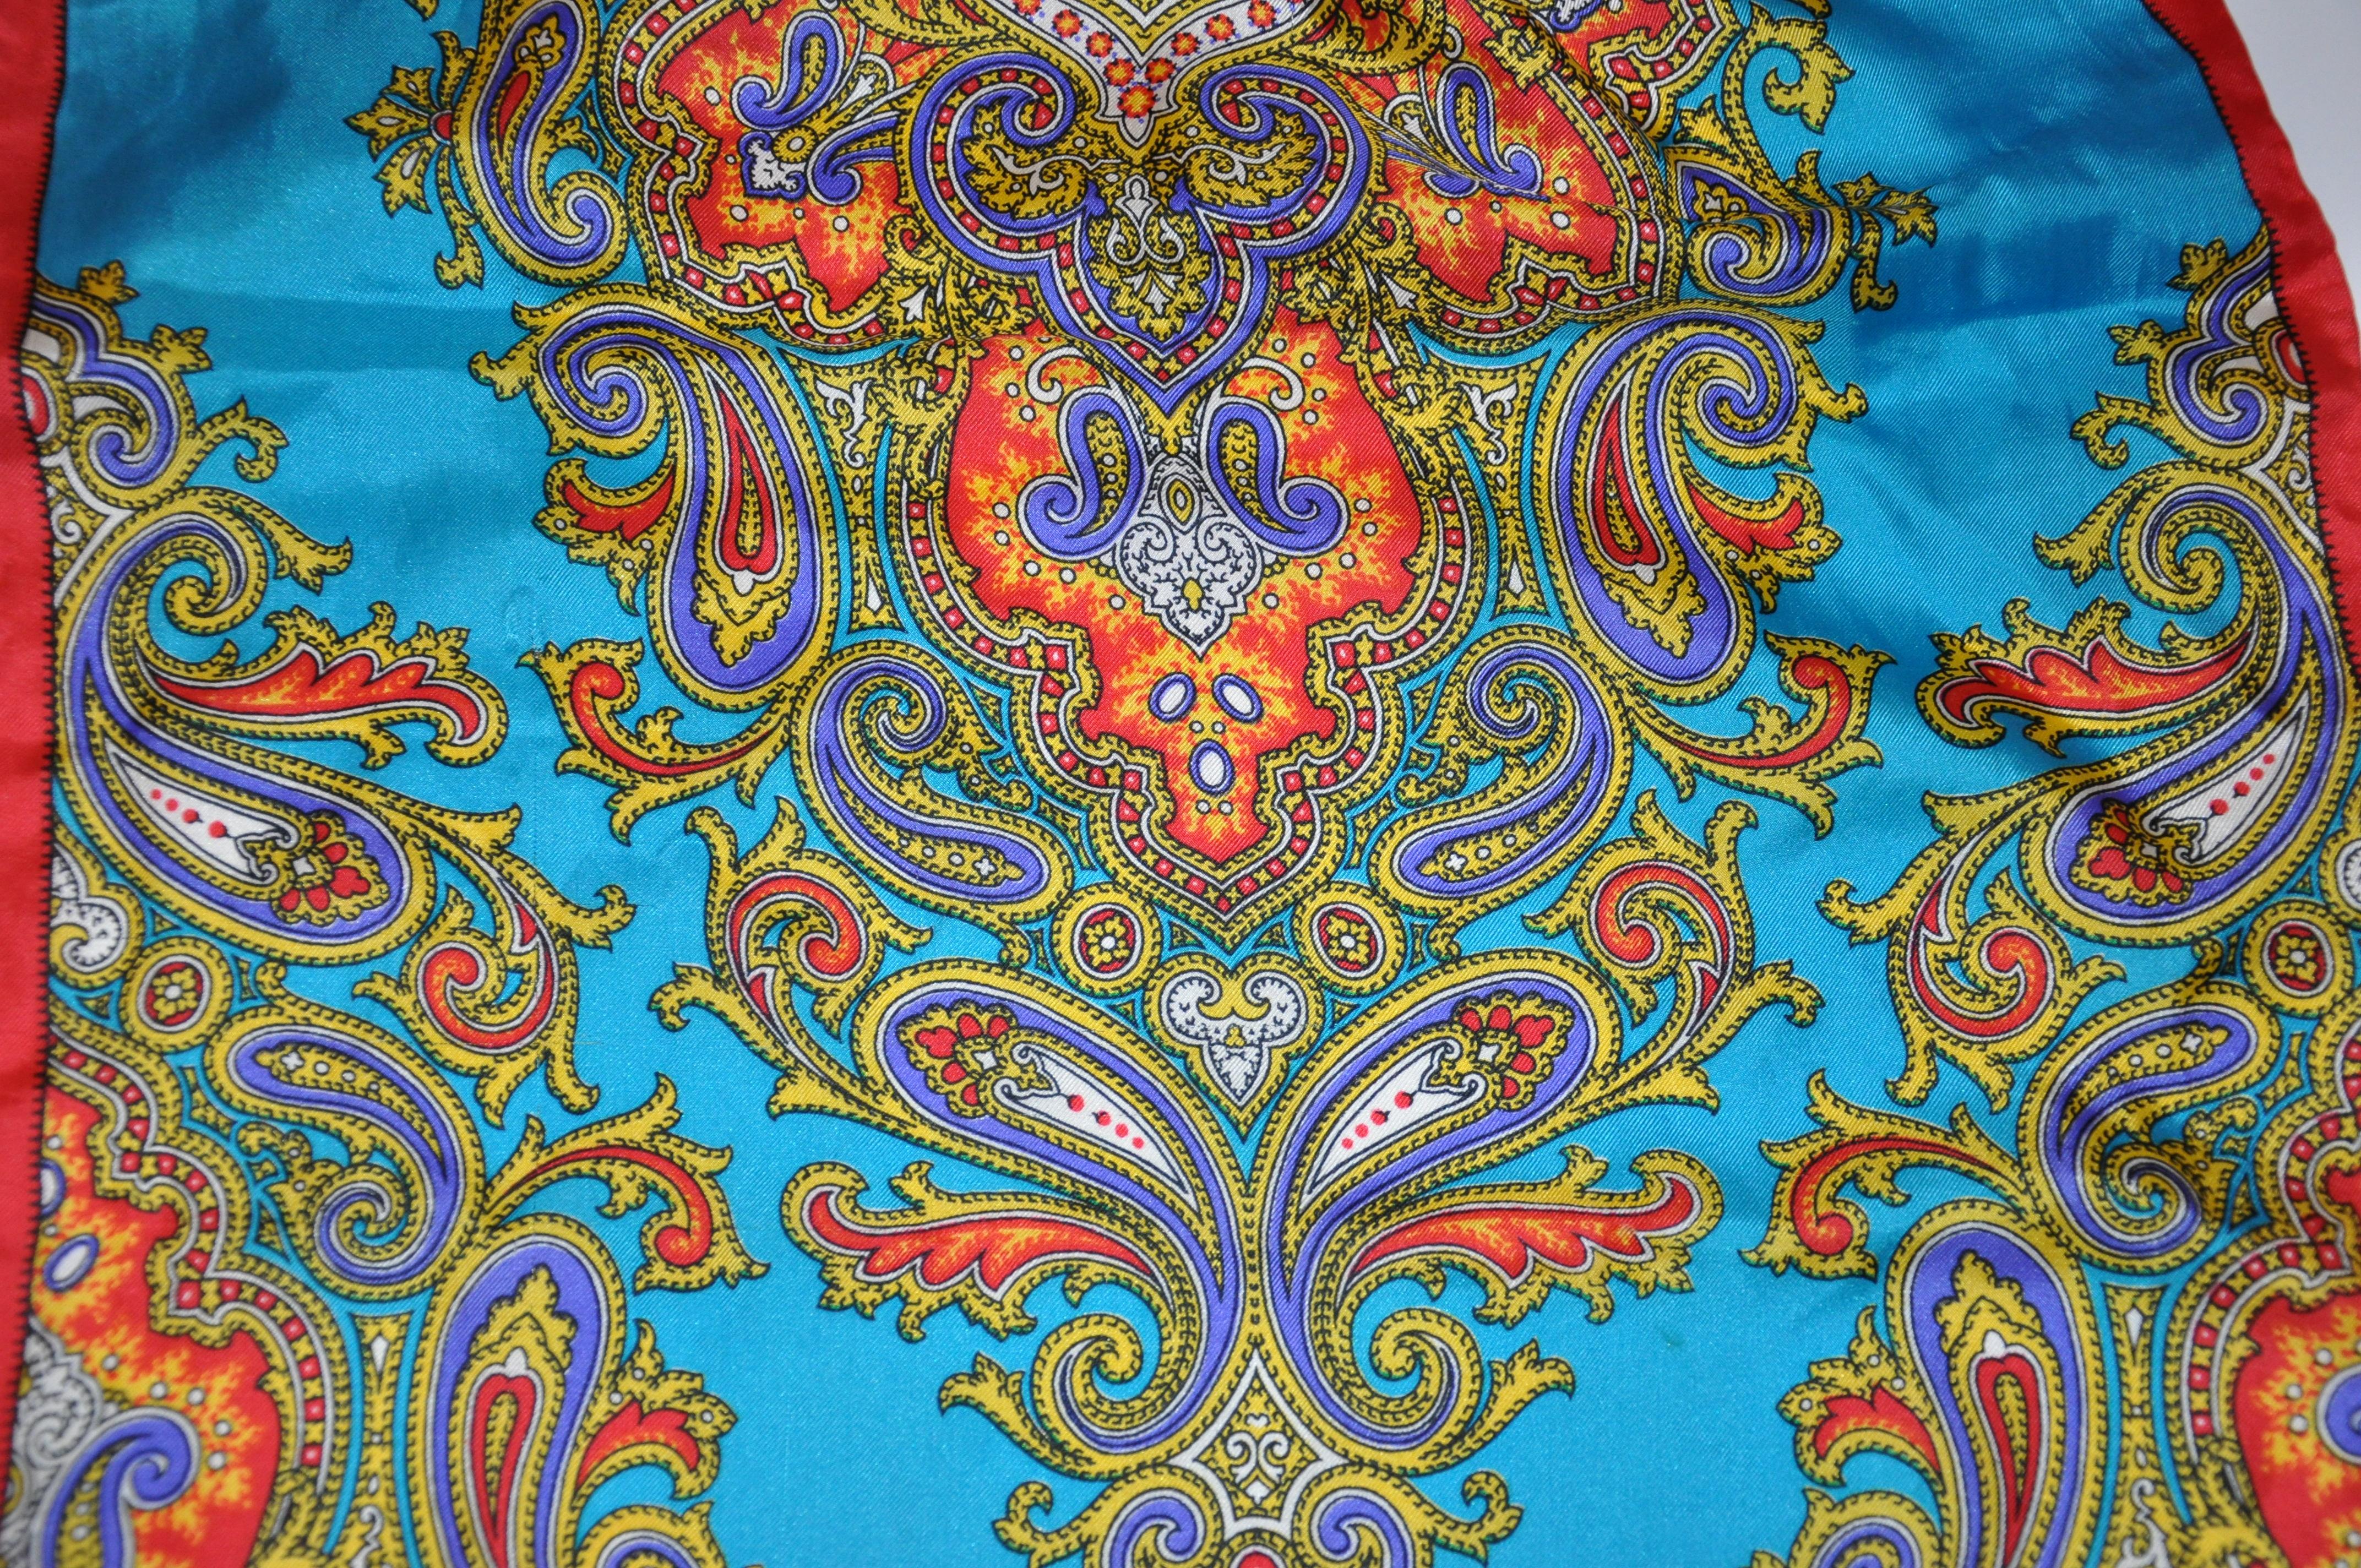 Green Burmel Red Border With Turquoise Multicolor Palseys Silk Scarf For Sale